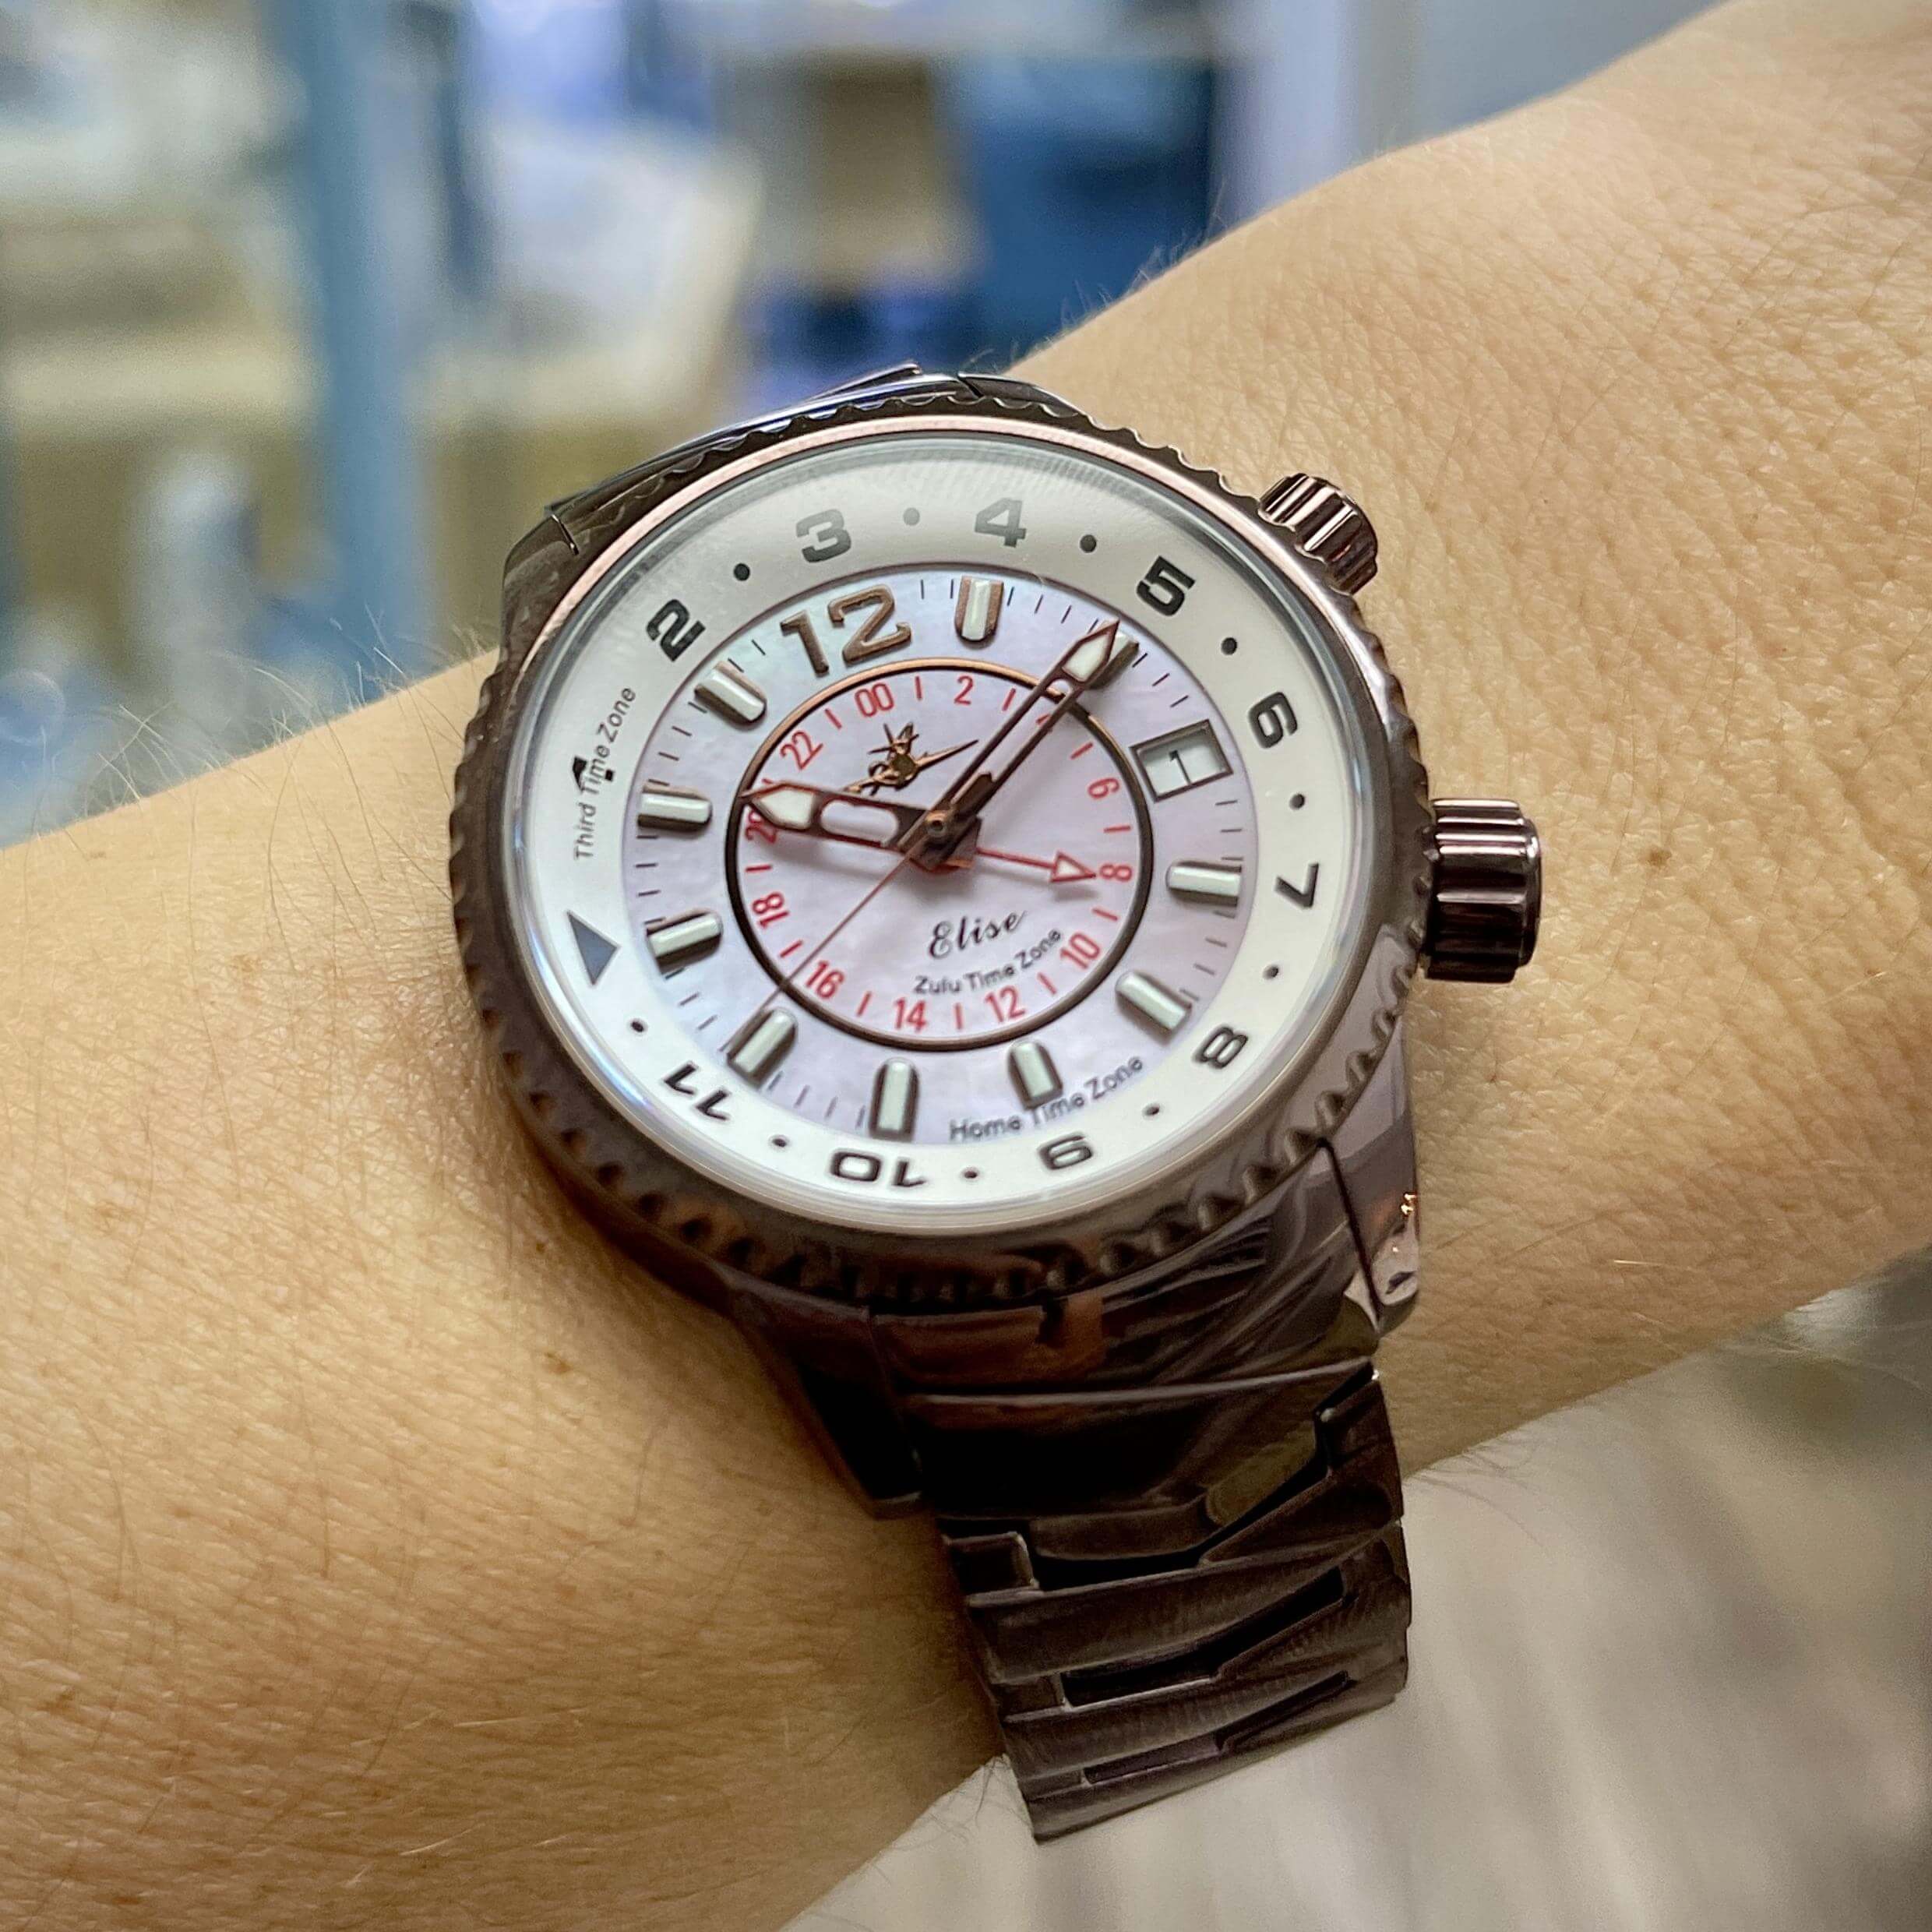 Abingdon Co. Image displays Elise brown travel watch with pink dial on a wrist indoor shot with furniture in the background. Elise travel watch has three time zones displayed on a single circular dial. Mother of pearl face and GMT displayed women's watch